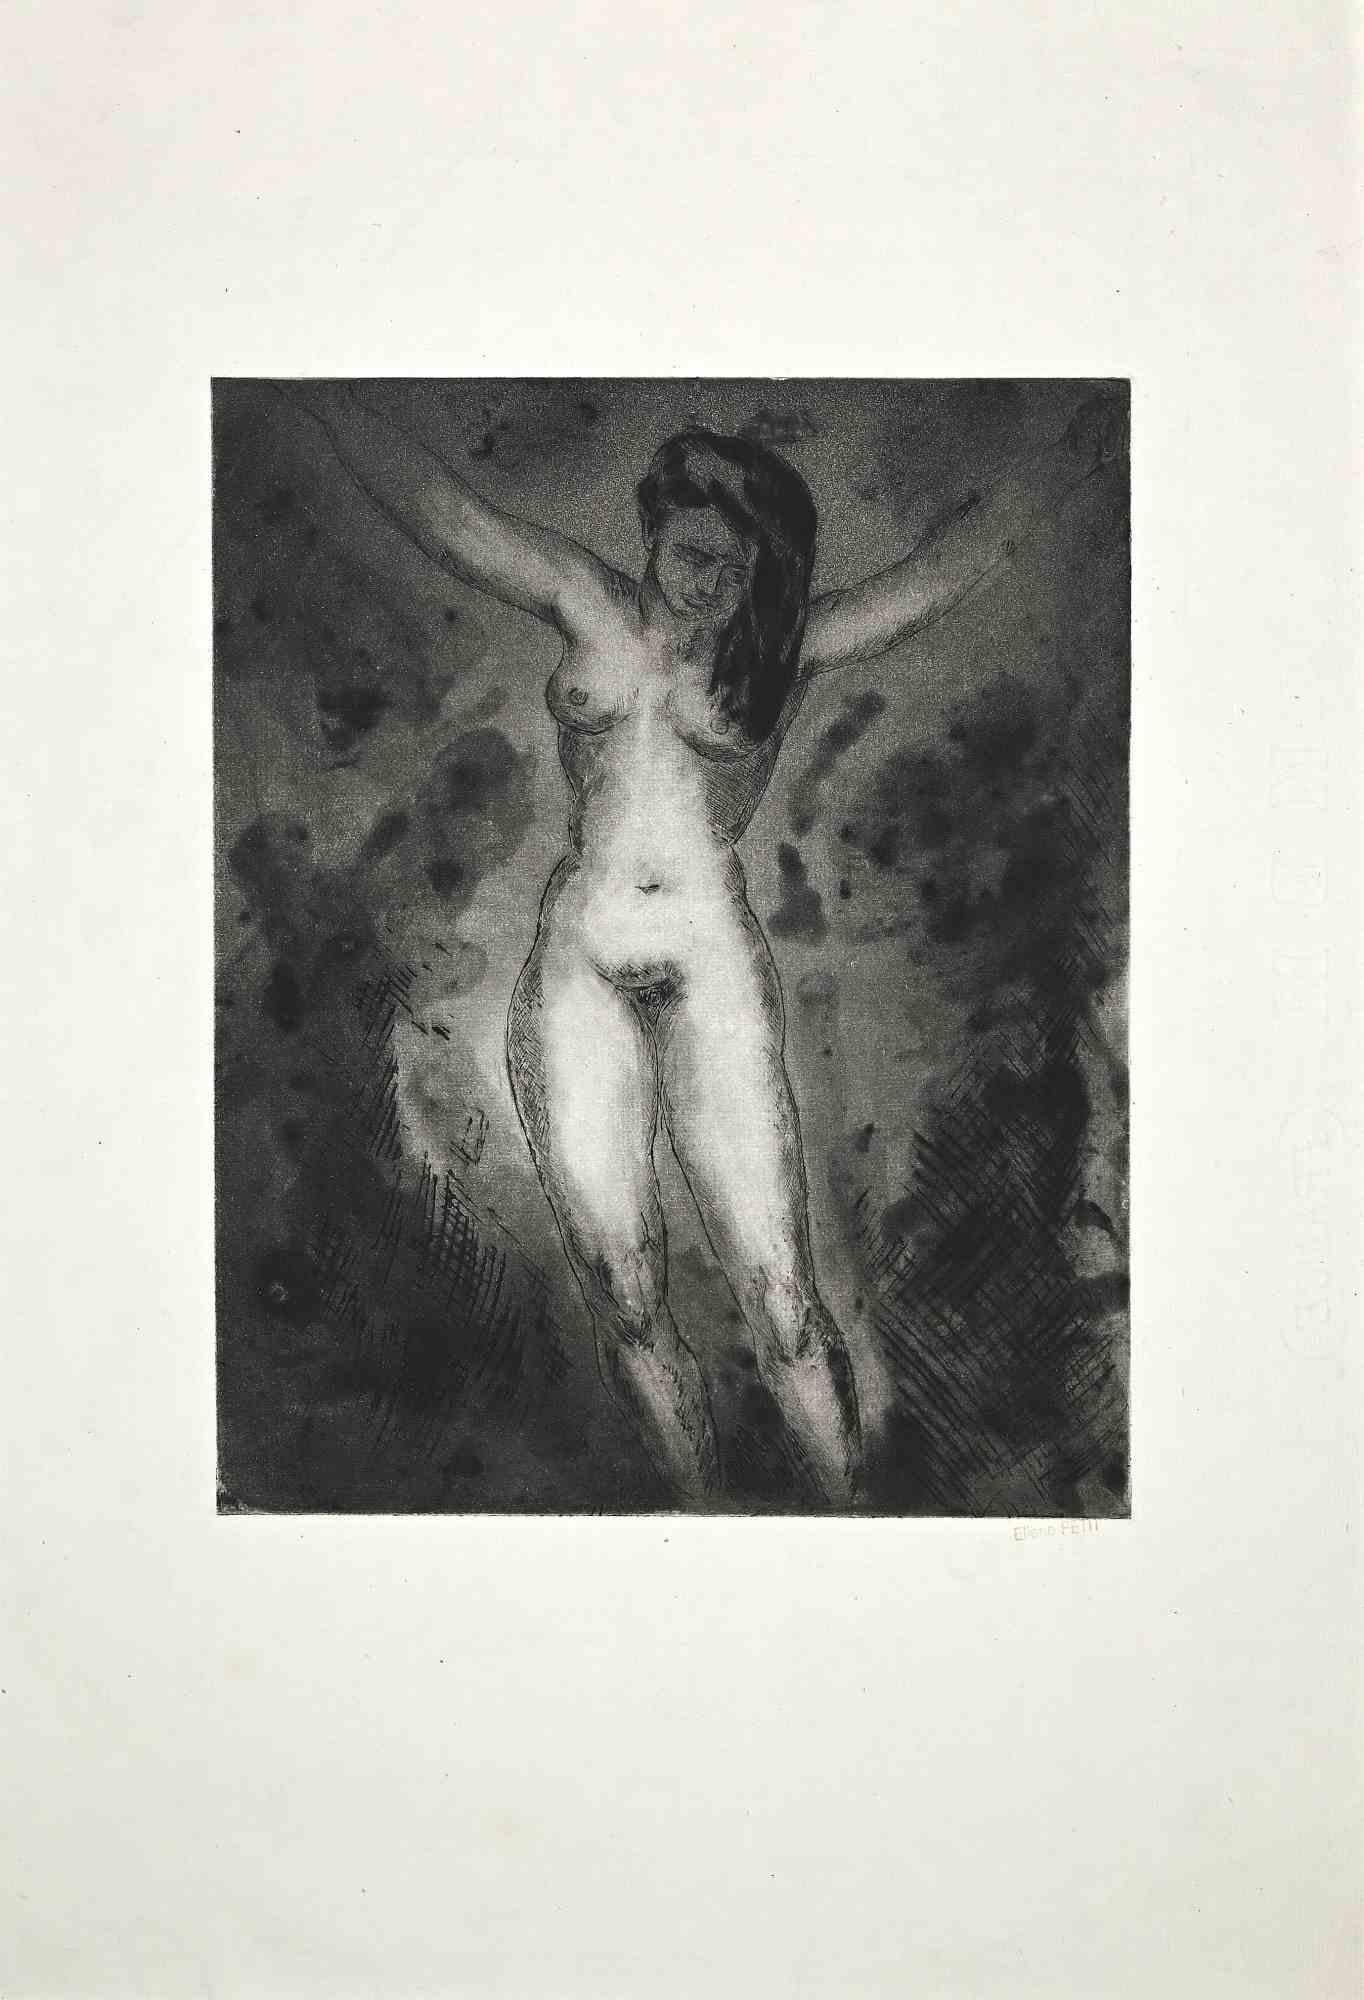 Nude of Woman - Original Etching and Aquatint by Eliane Petit - 1950